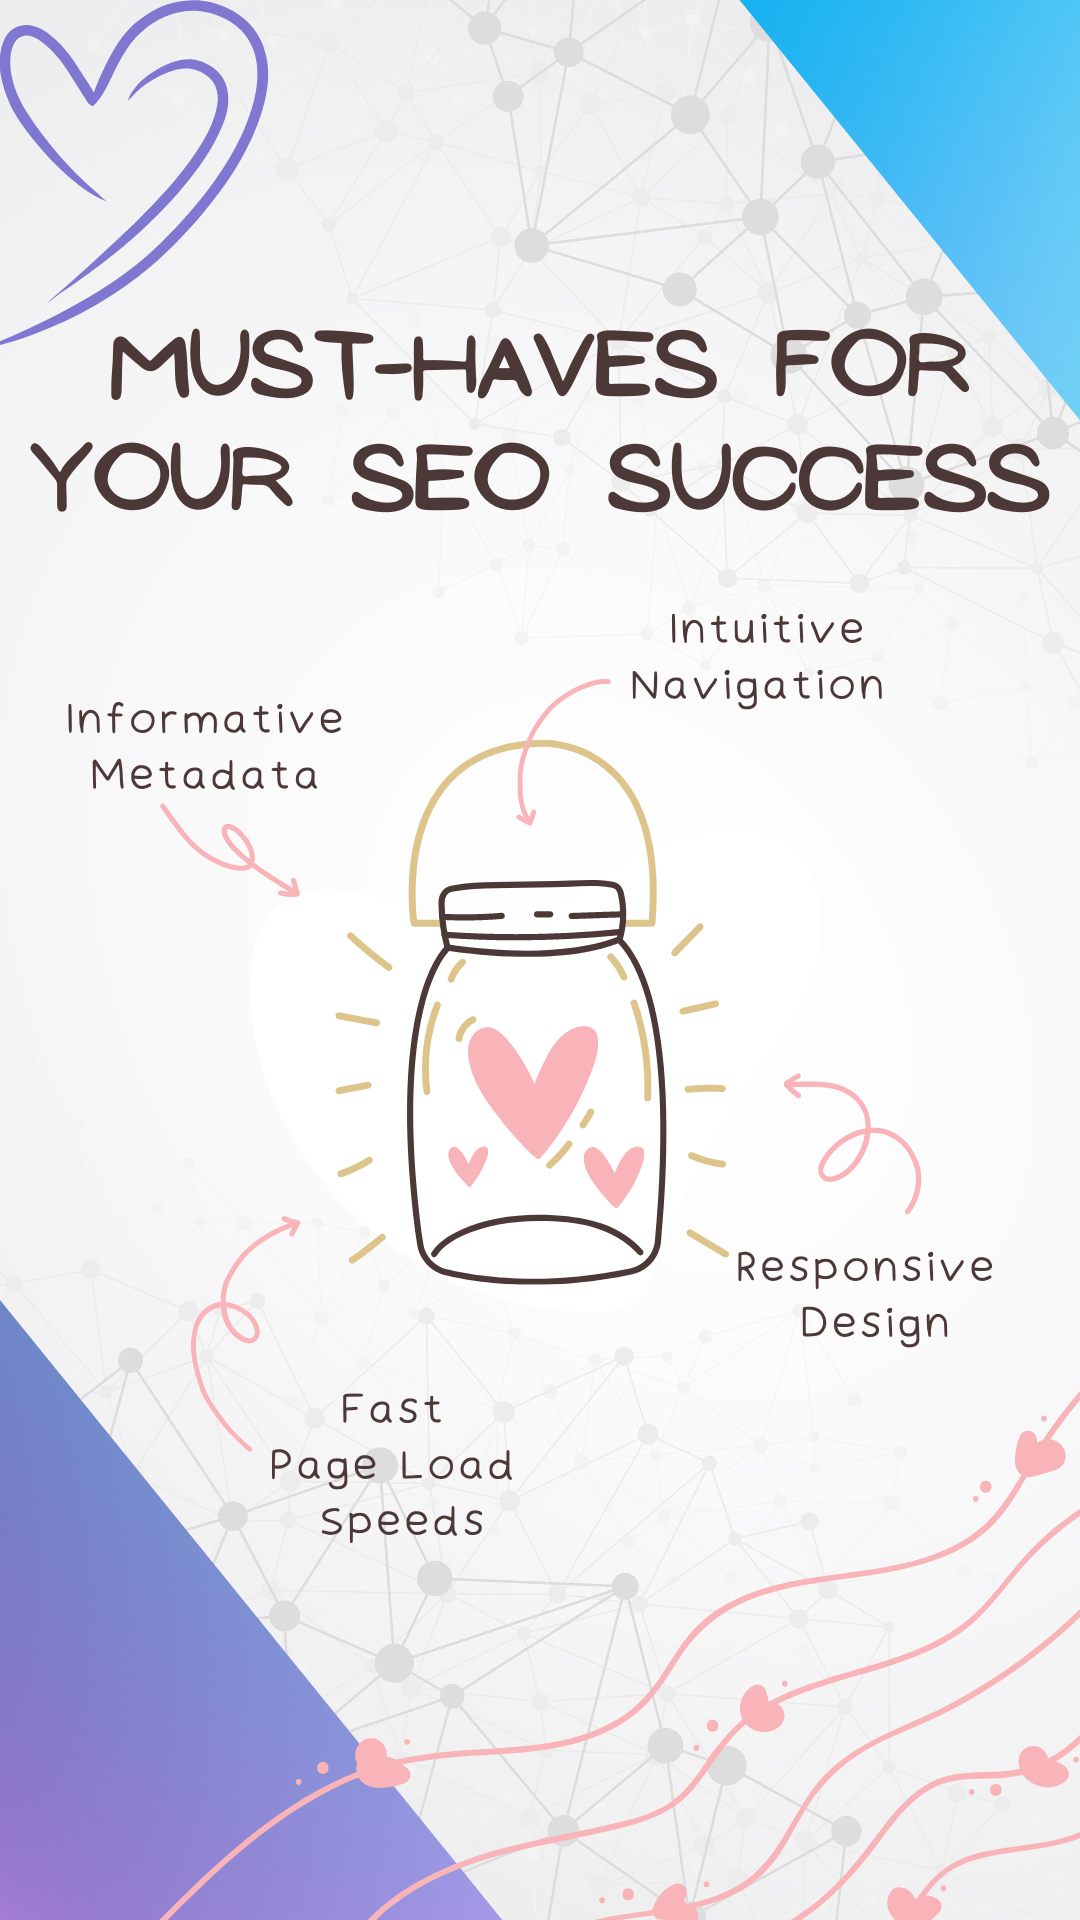 A jar filled with hearts surrounded by curly arrows directing additional SEO tactics inside